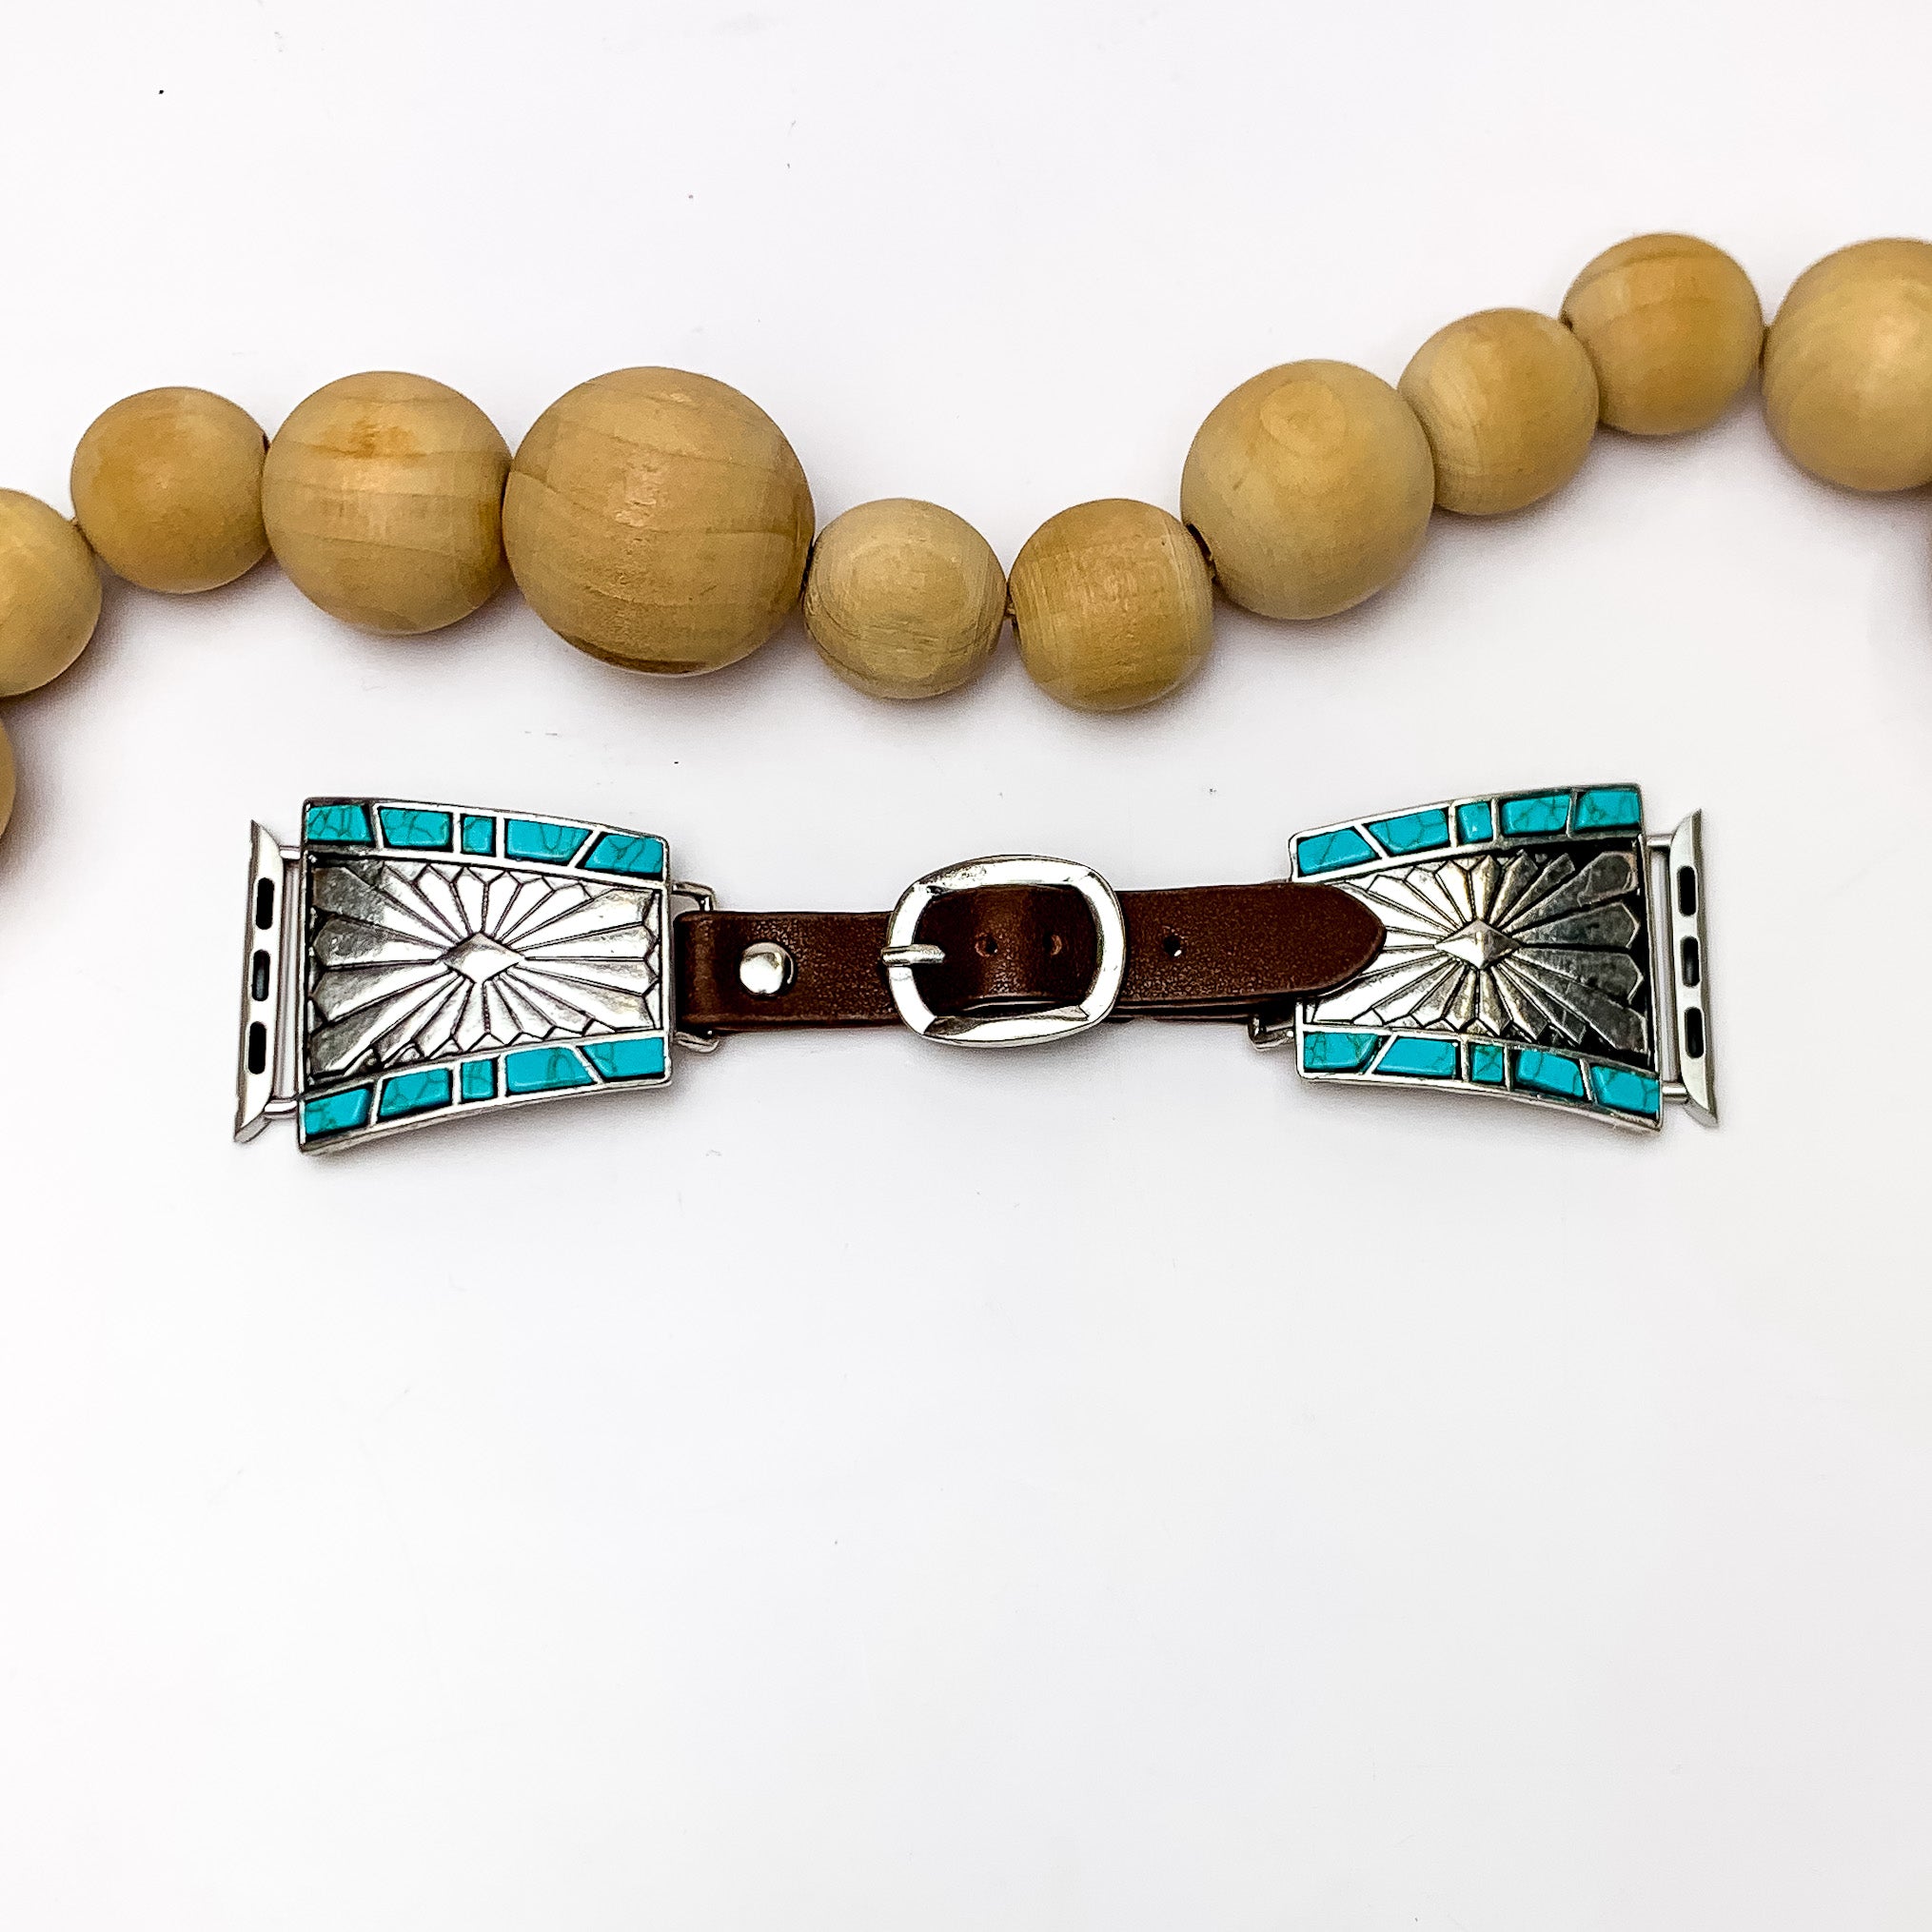 Brown Watch Band with Silver Tone Designs and Turquoise Stones. Pictured on a white background with wood beads above the band for decoration. 